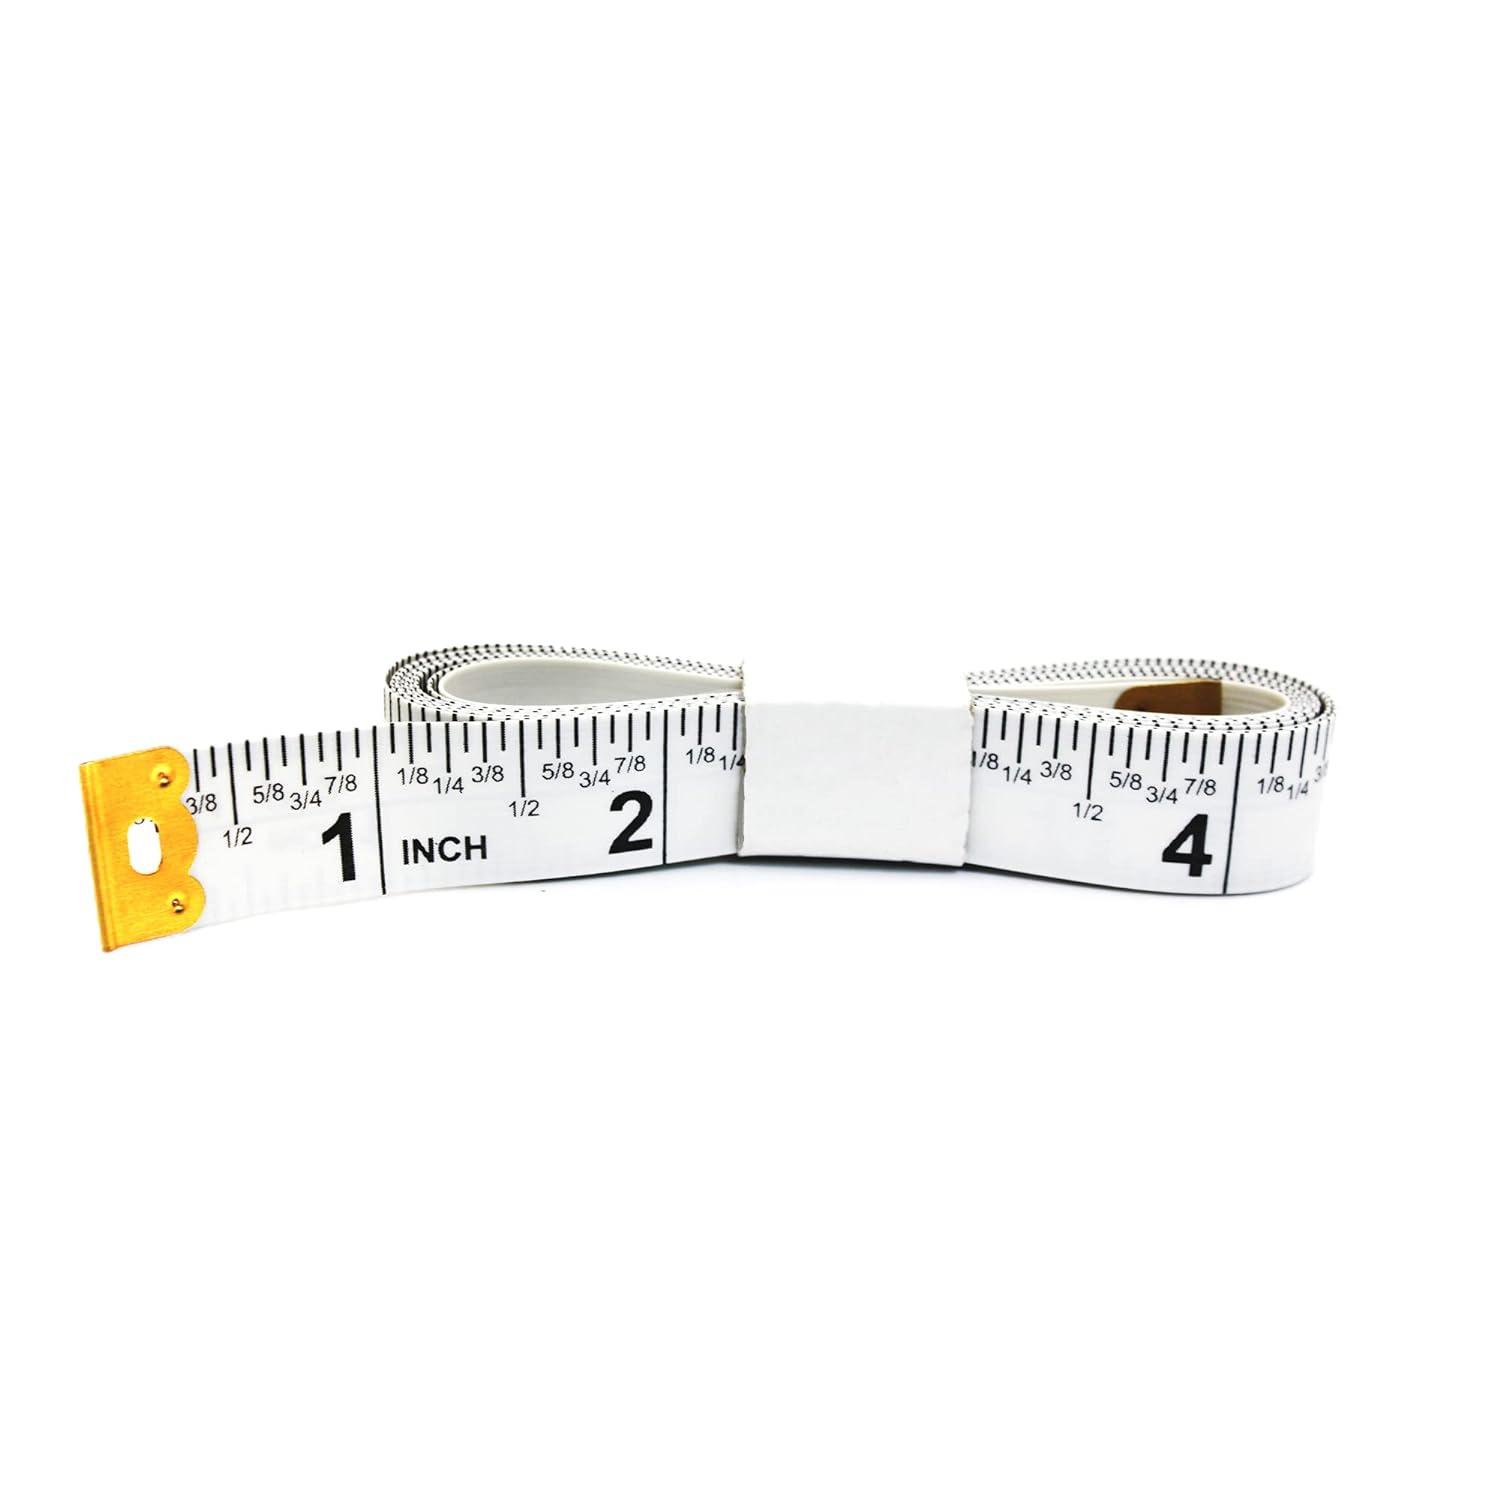 Perfect Measuring Tape- Fraction Tape Measure All-Purpose Tape  Measure-Double Sided Fractional Inches & Millimeter/Centimeter Tape Measure  (10 Pack- 60in - White) 10 Pack - 60in/1.5m White